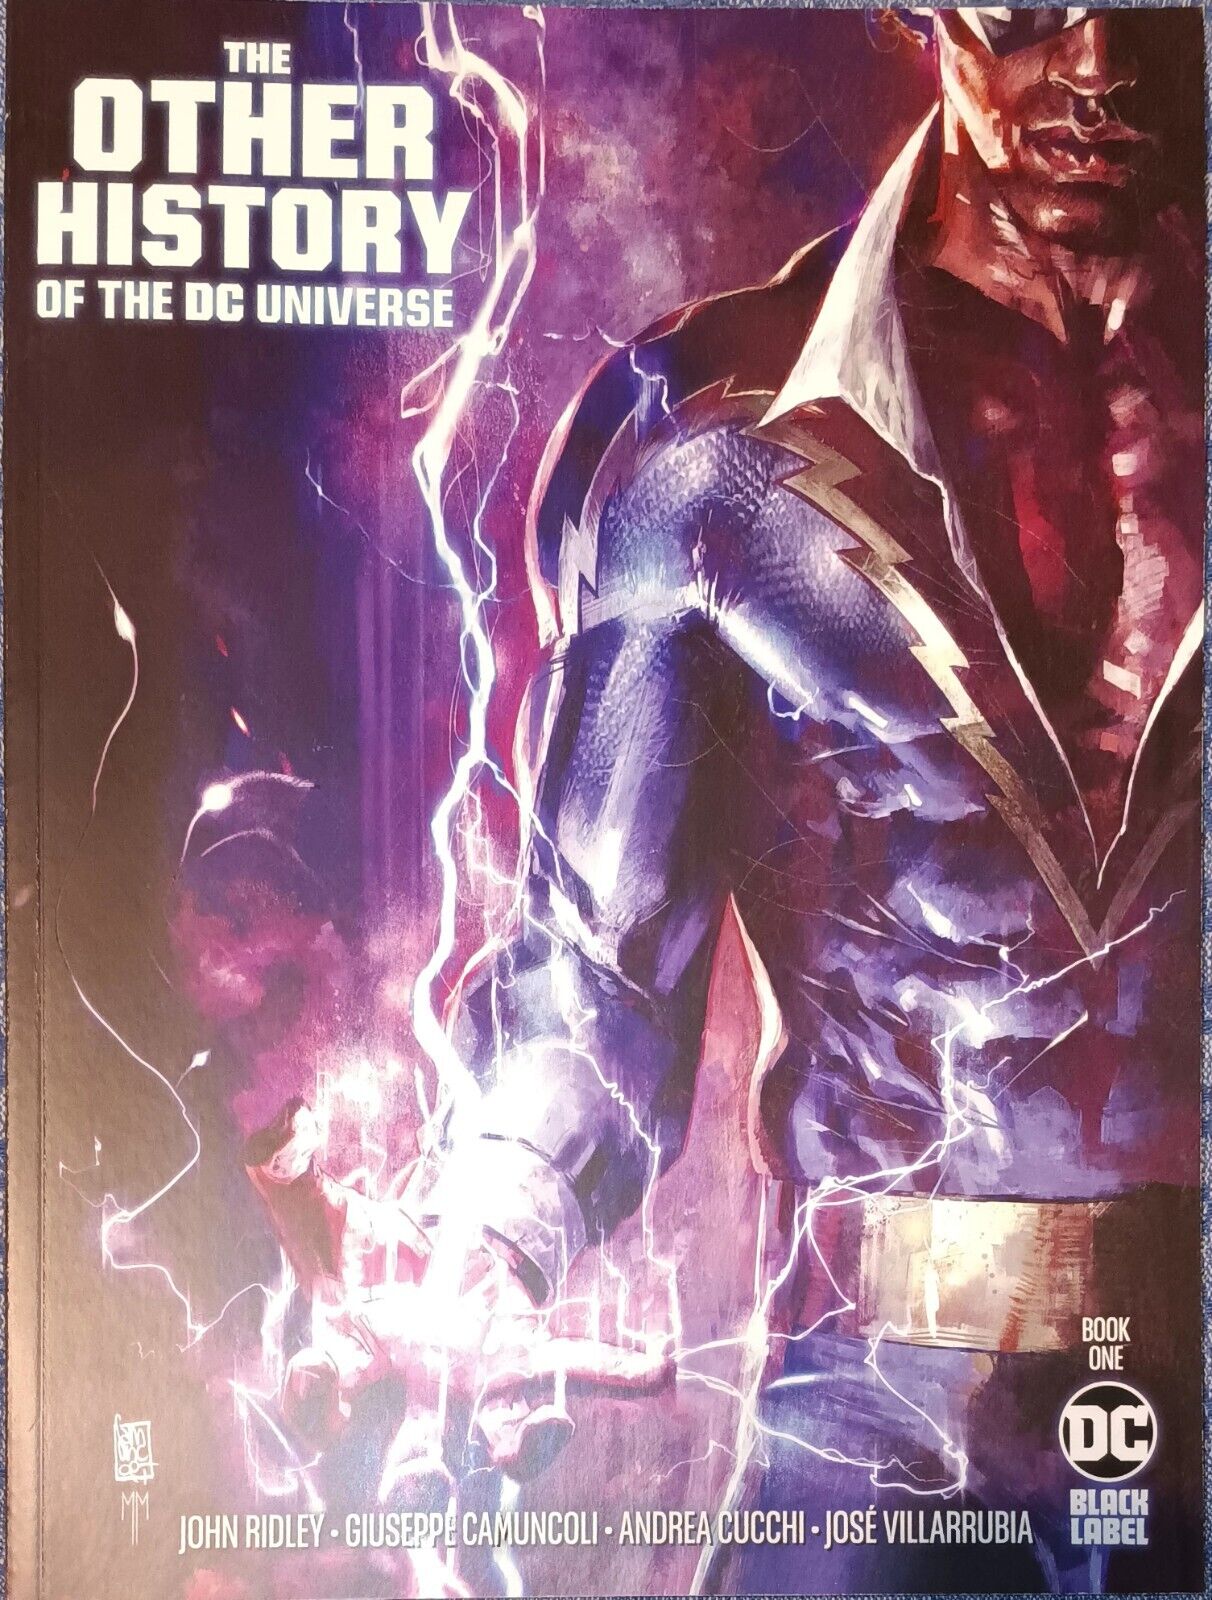 THE OTHER HISTORY OF THE DC UNIVERSE #1. DC Black Label 2020